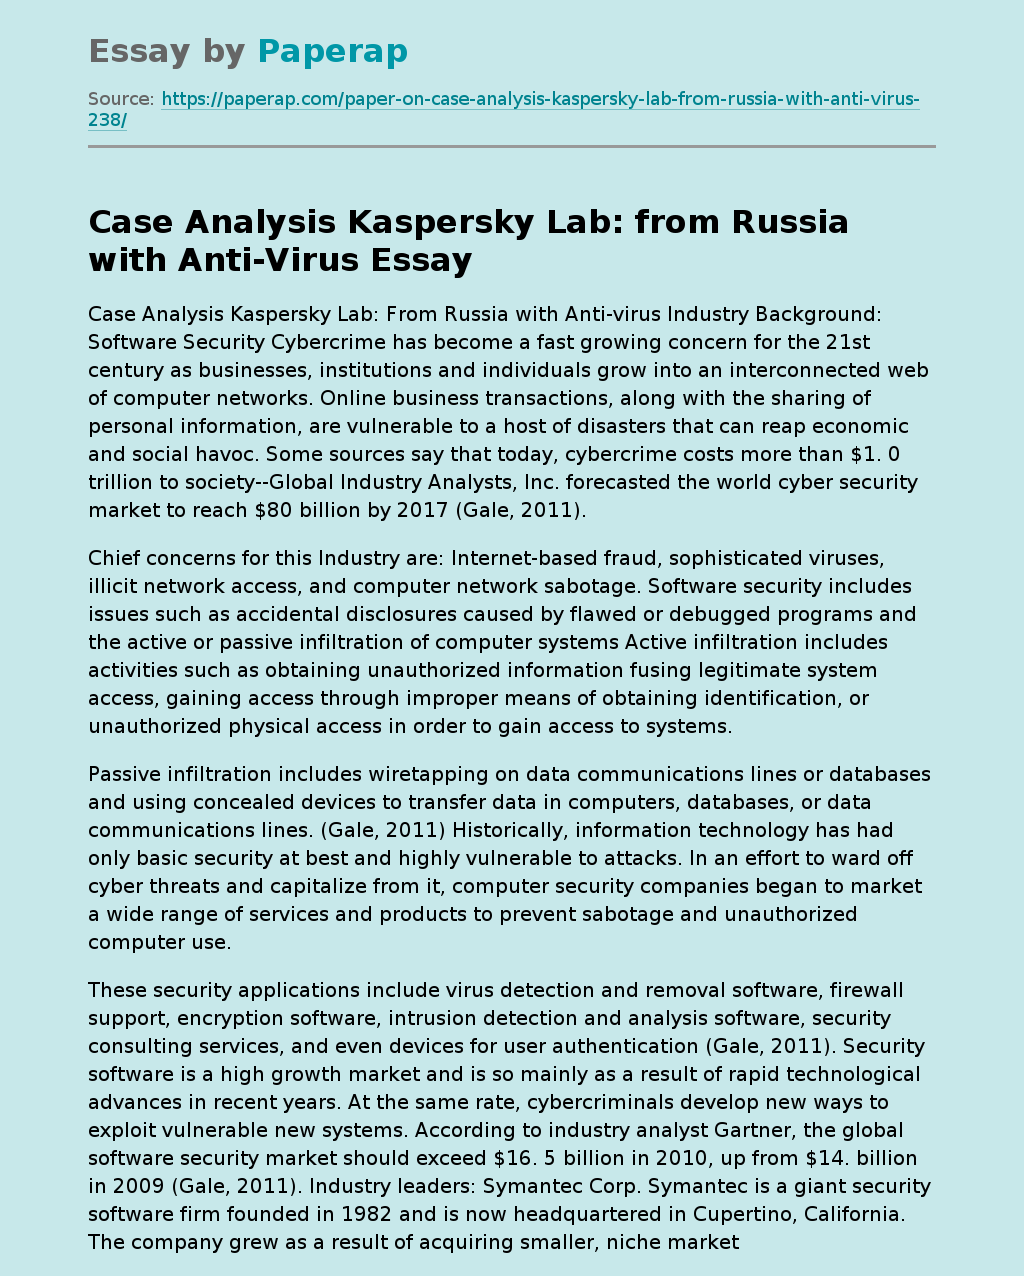 Case Analysis Kaspersky Lab: from Russia with Anti-Virus